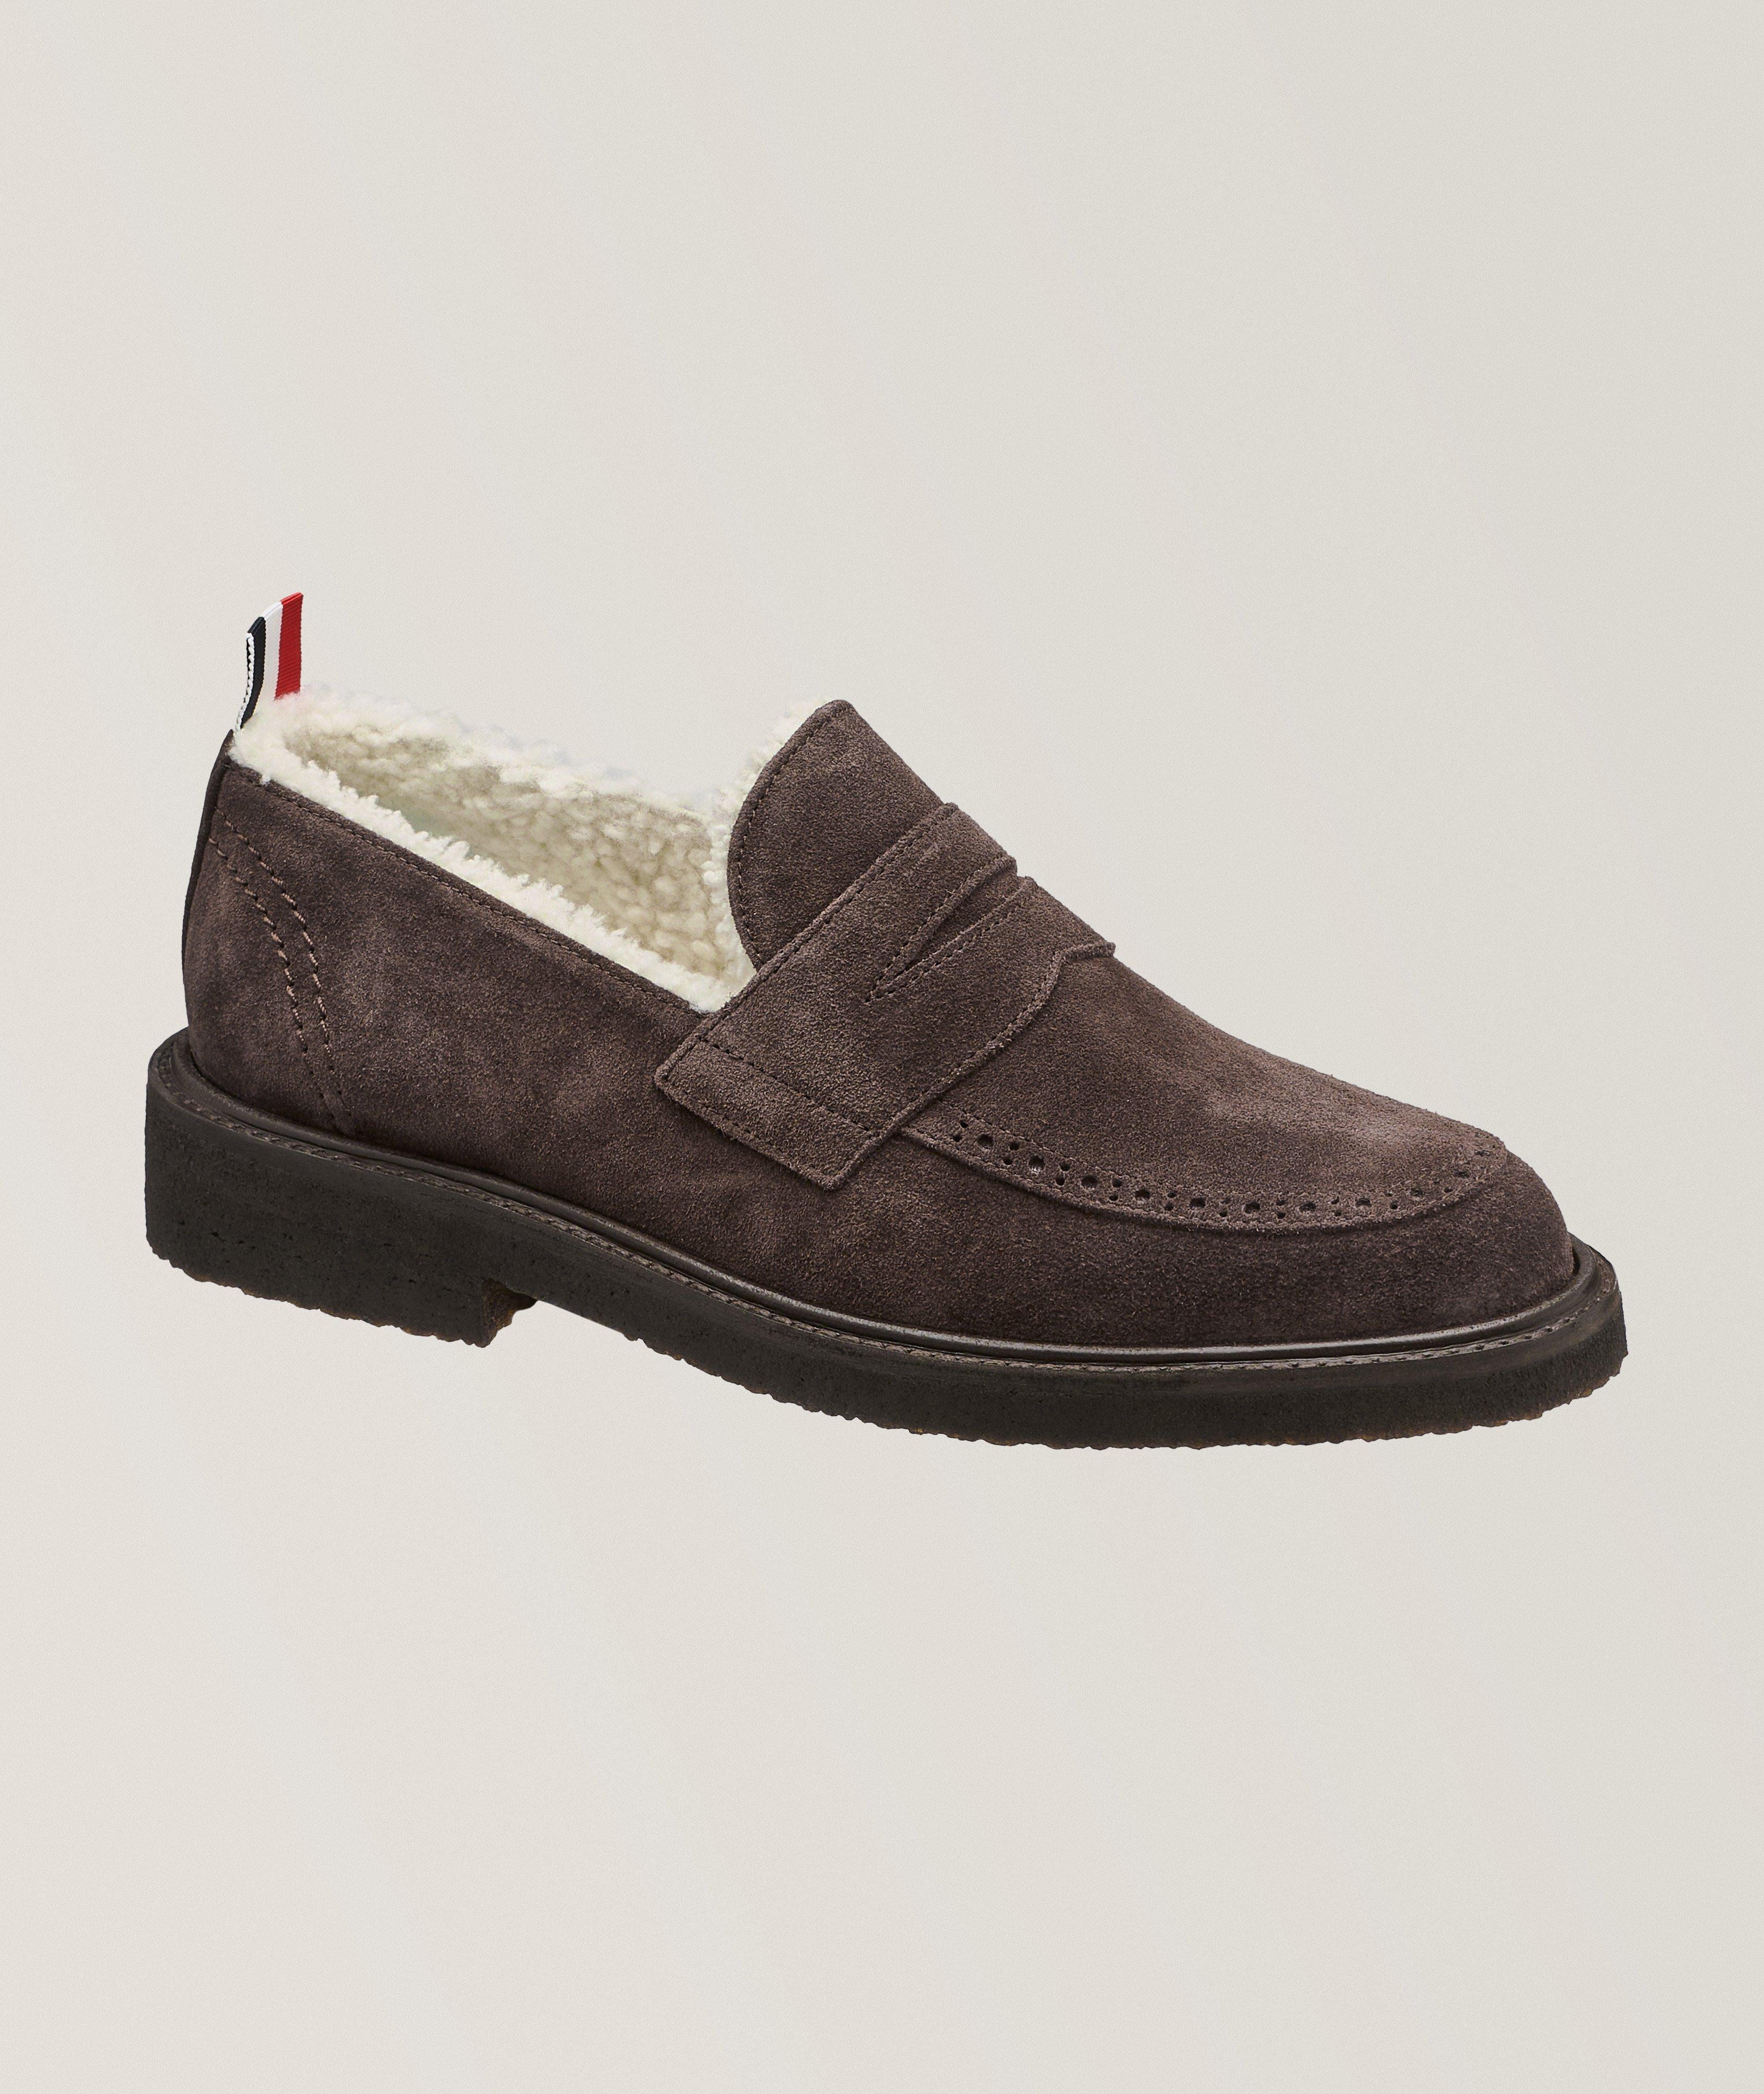 Shearling Lined Suede Penny Loafers